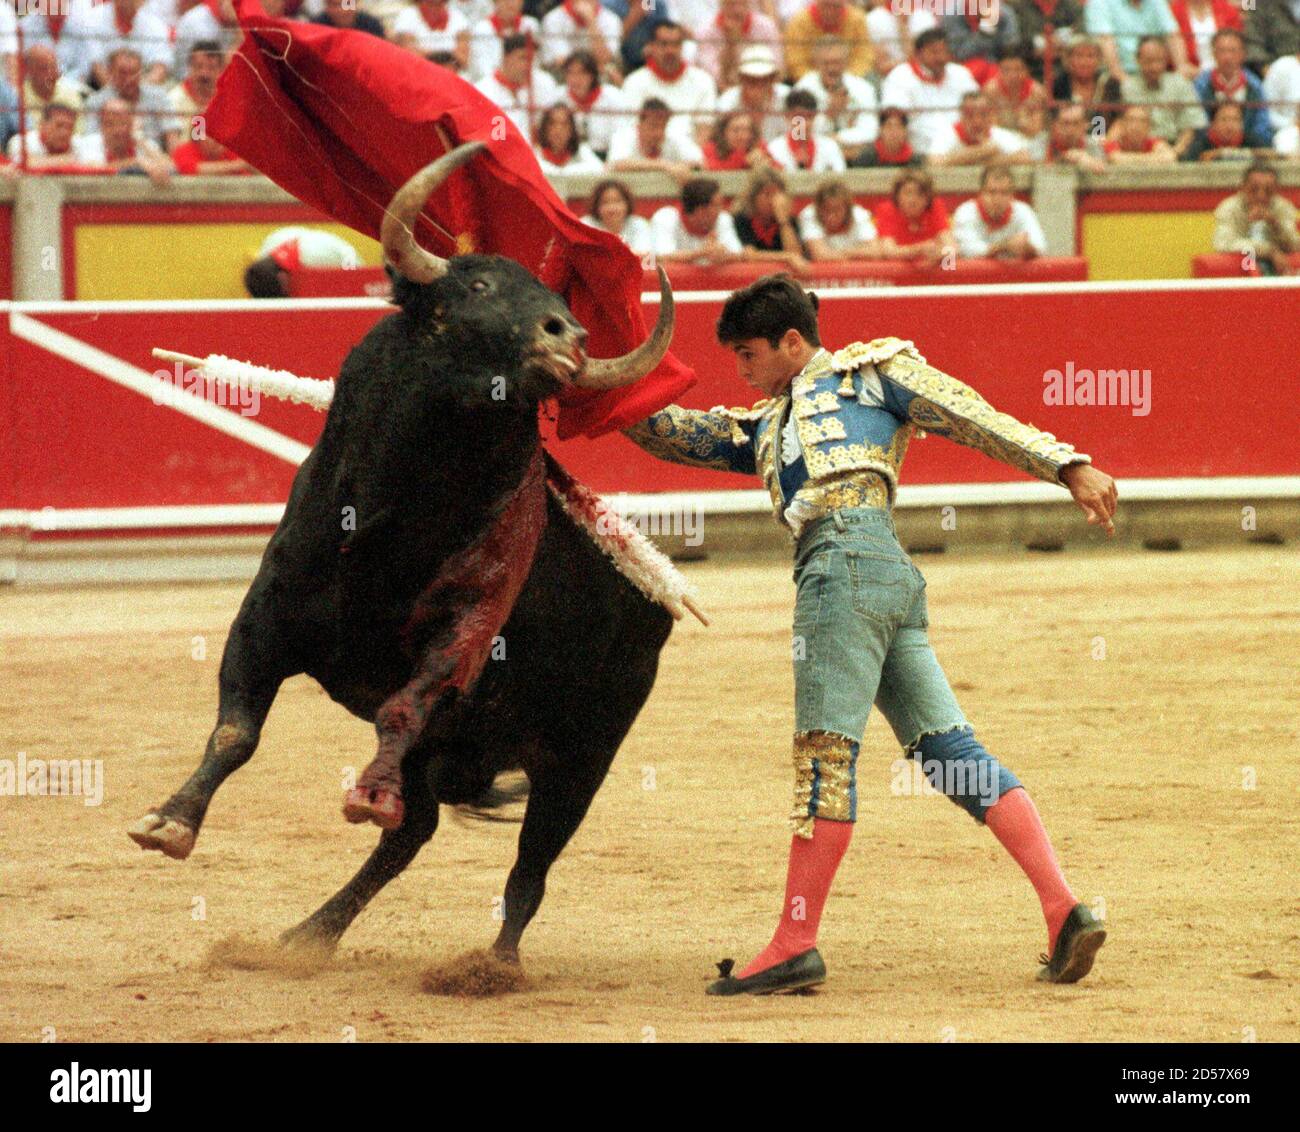 Fransisco Rivera Ordonez, one of the top Spanish matadors, performs a chest  pas with his bull named "Nordico" while wearing cutoff blue jeans July 13.  Earlier Ordonez was tossed by the bull